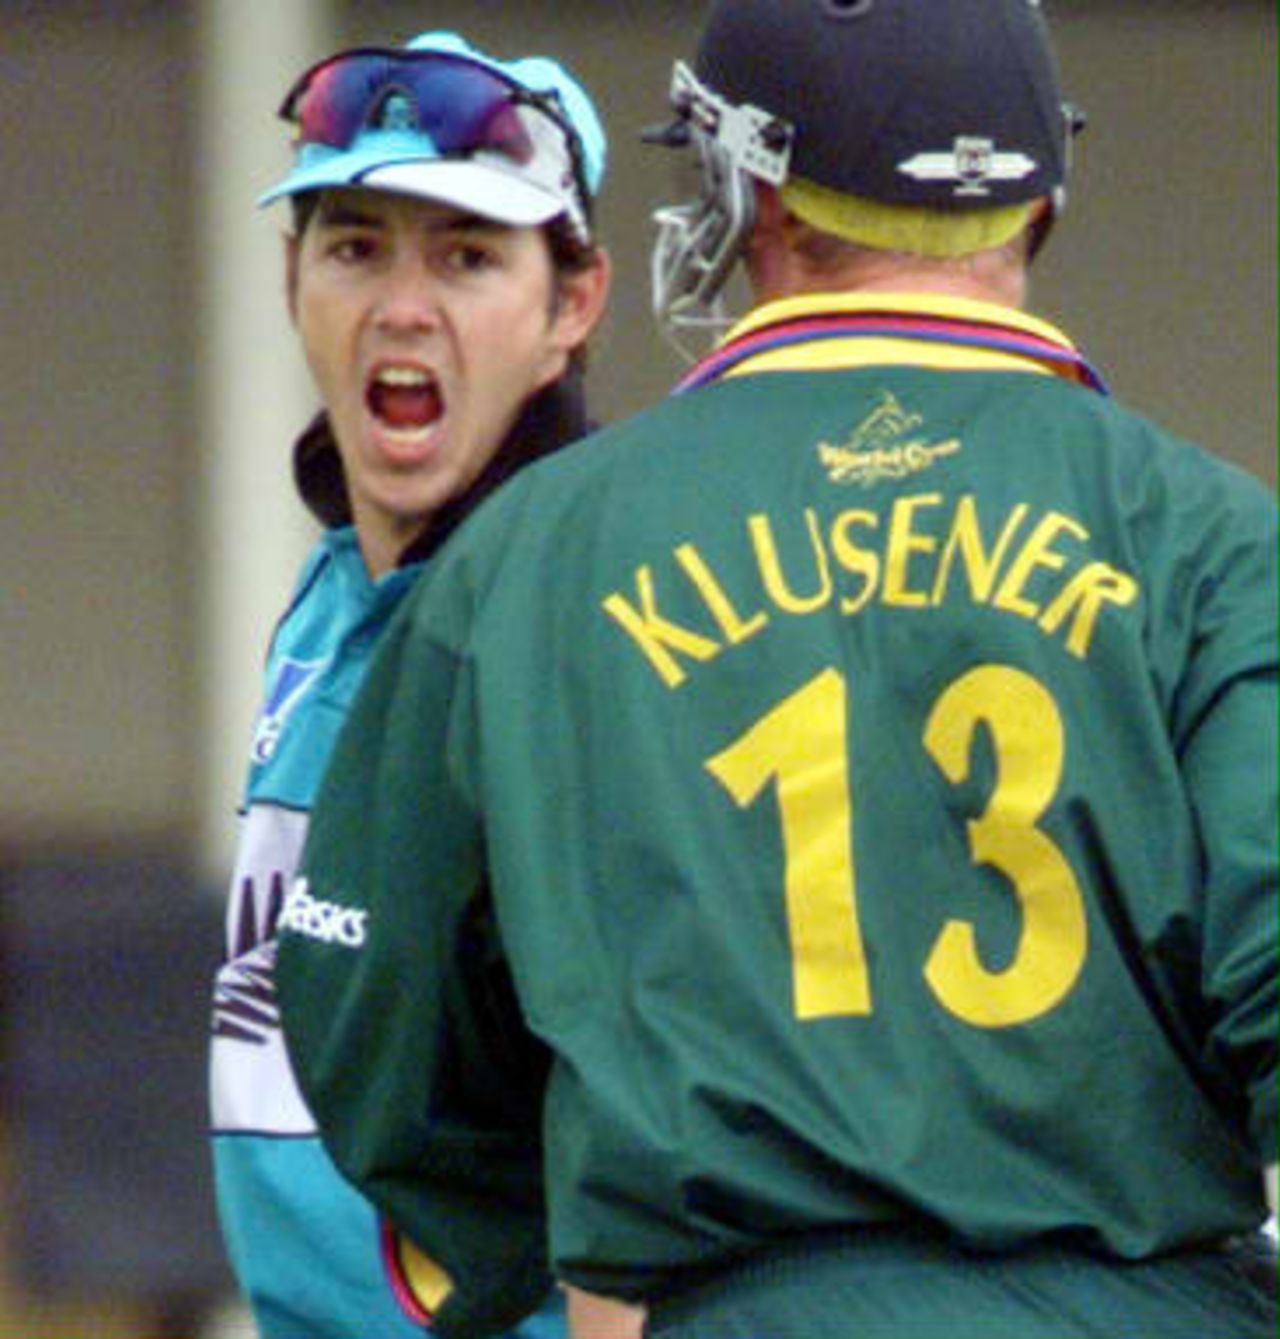 New Zealand wicket keeper Adam Parore shouts for South Africa's Lance Klusener wicket after he was bowled by Gavin Larsen 10 June 1999 during their Super Six match in the Cricket World Cup at Edgbaston